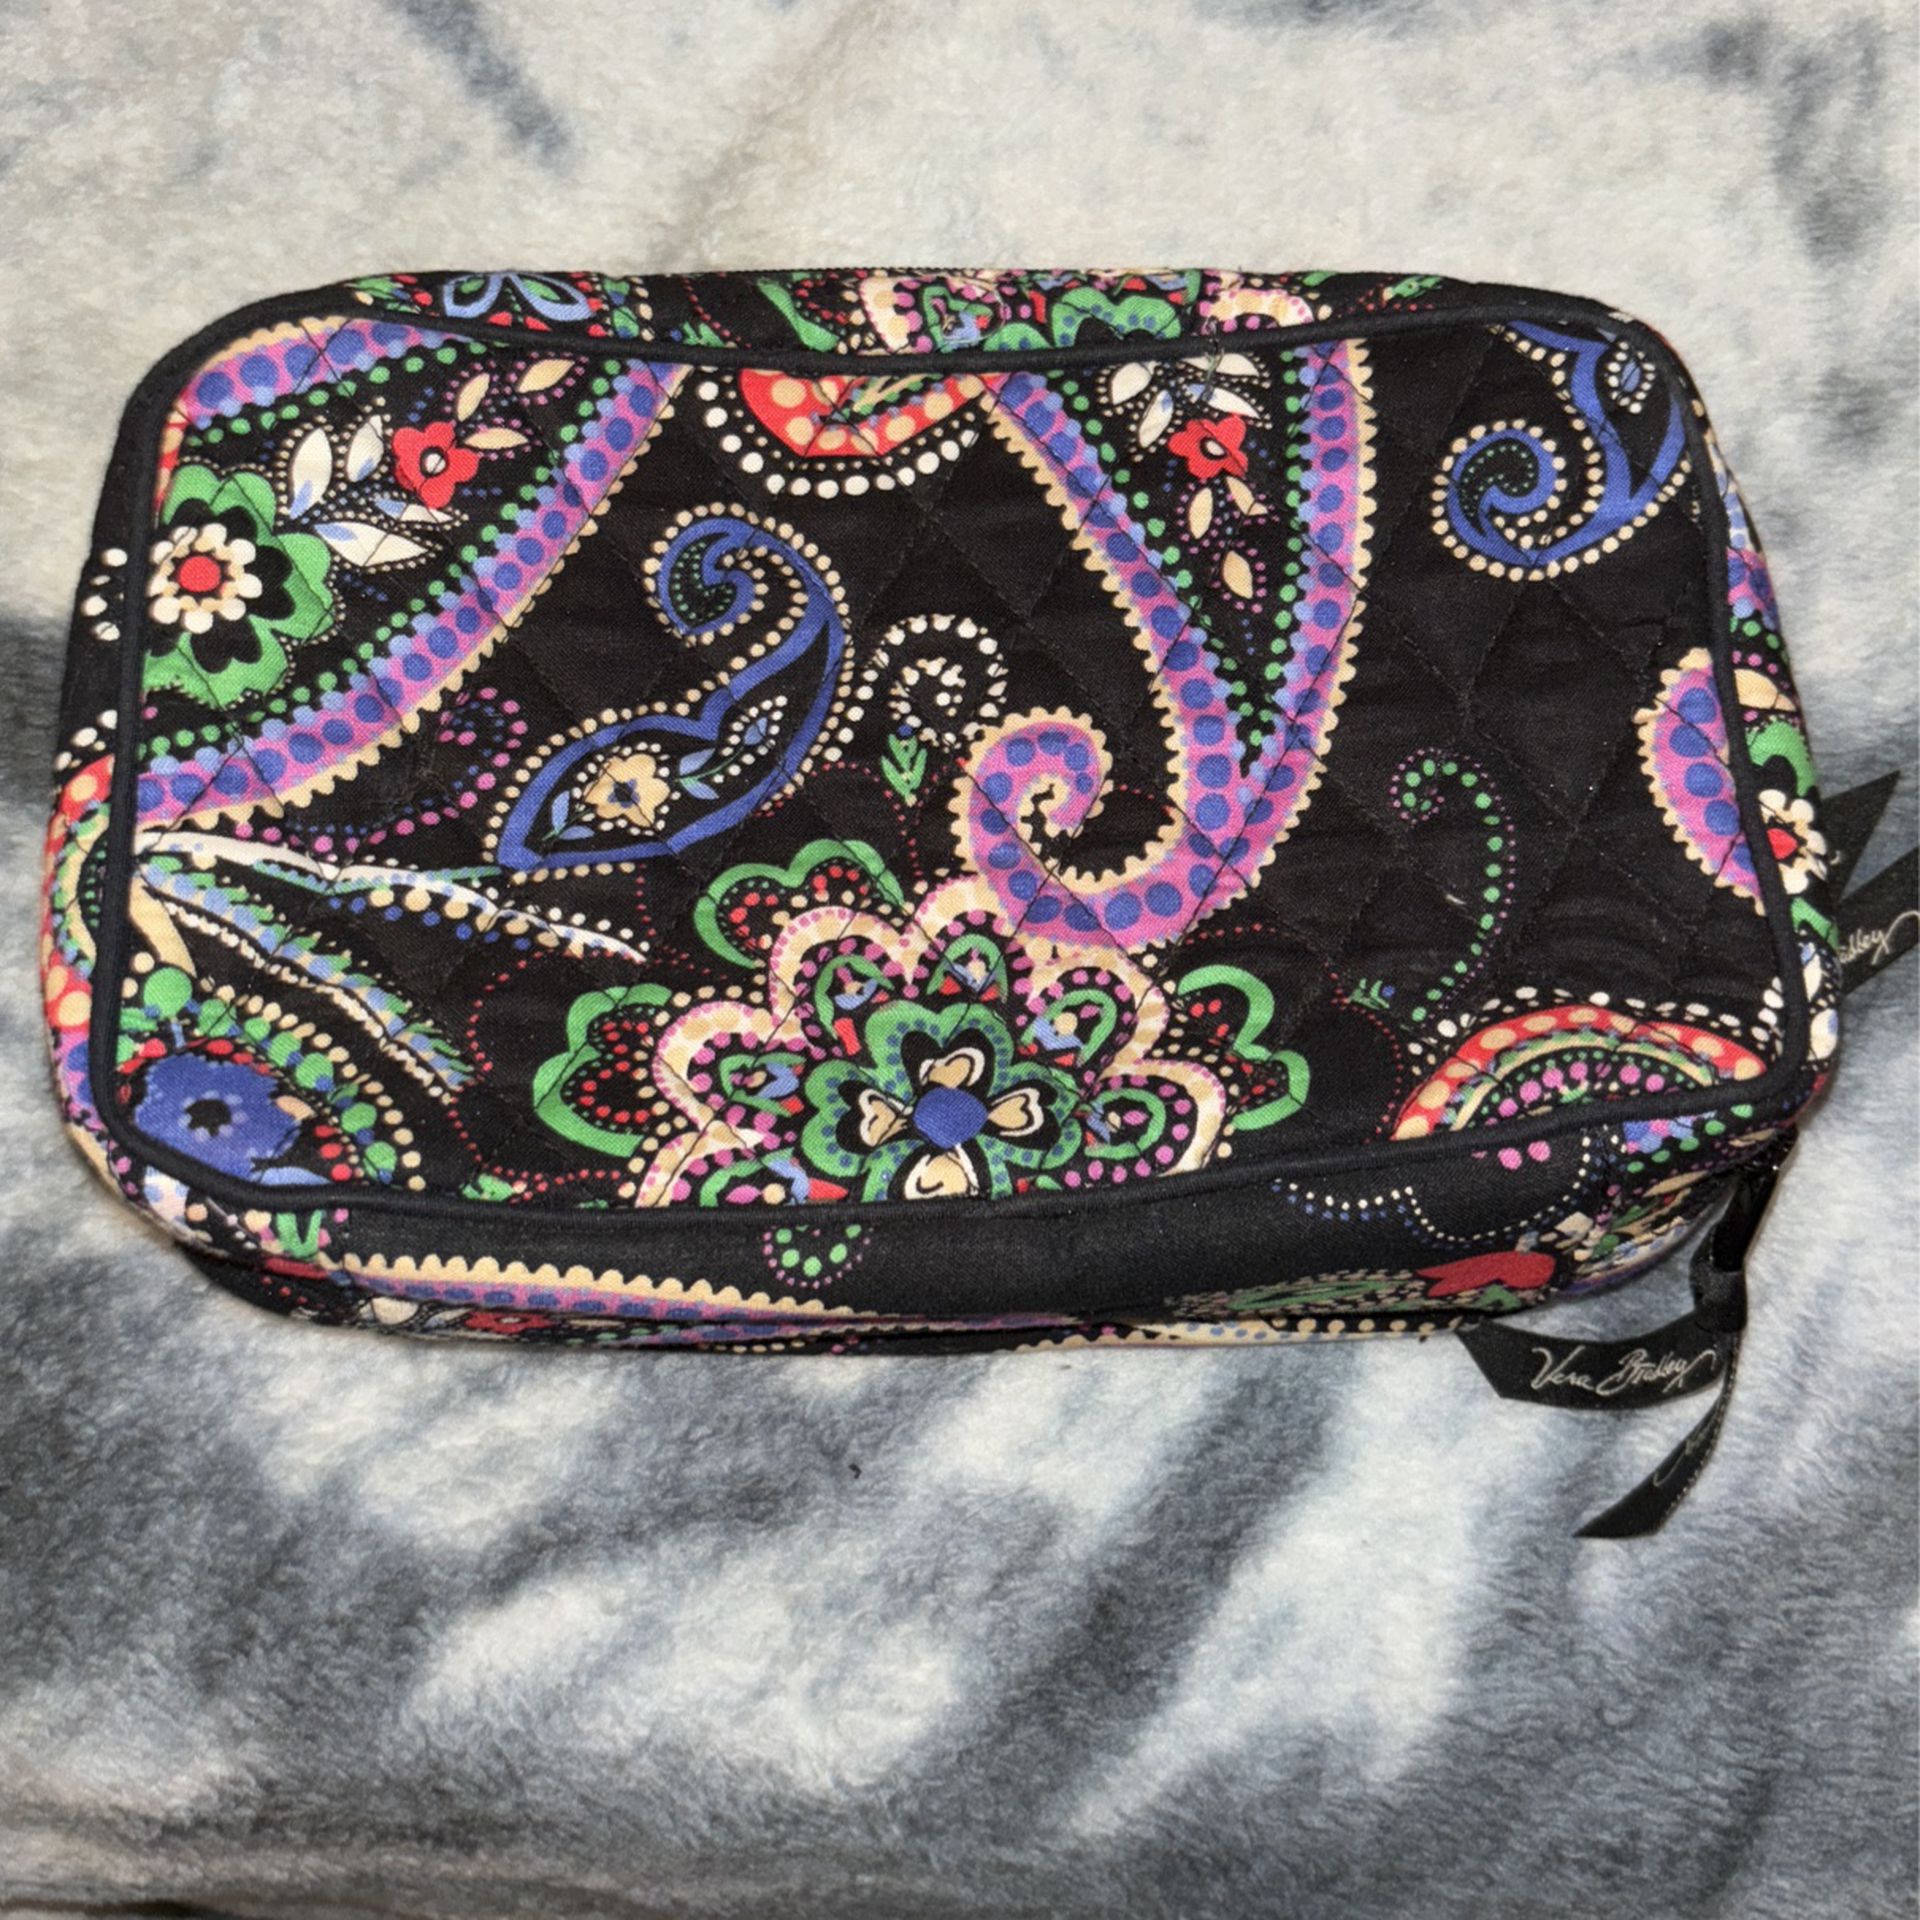 Travel Bag For Cosmetics 